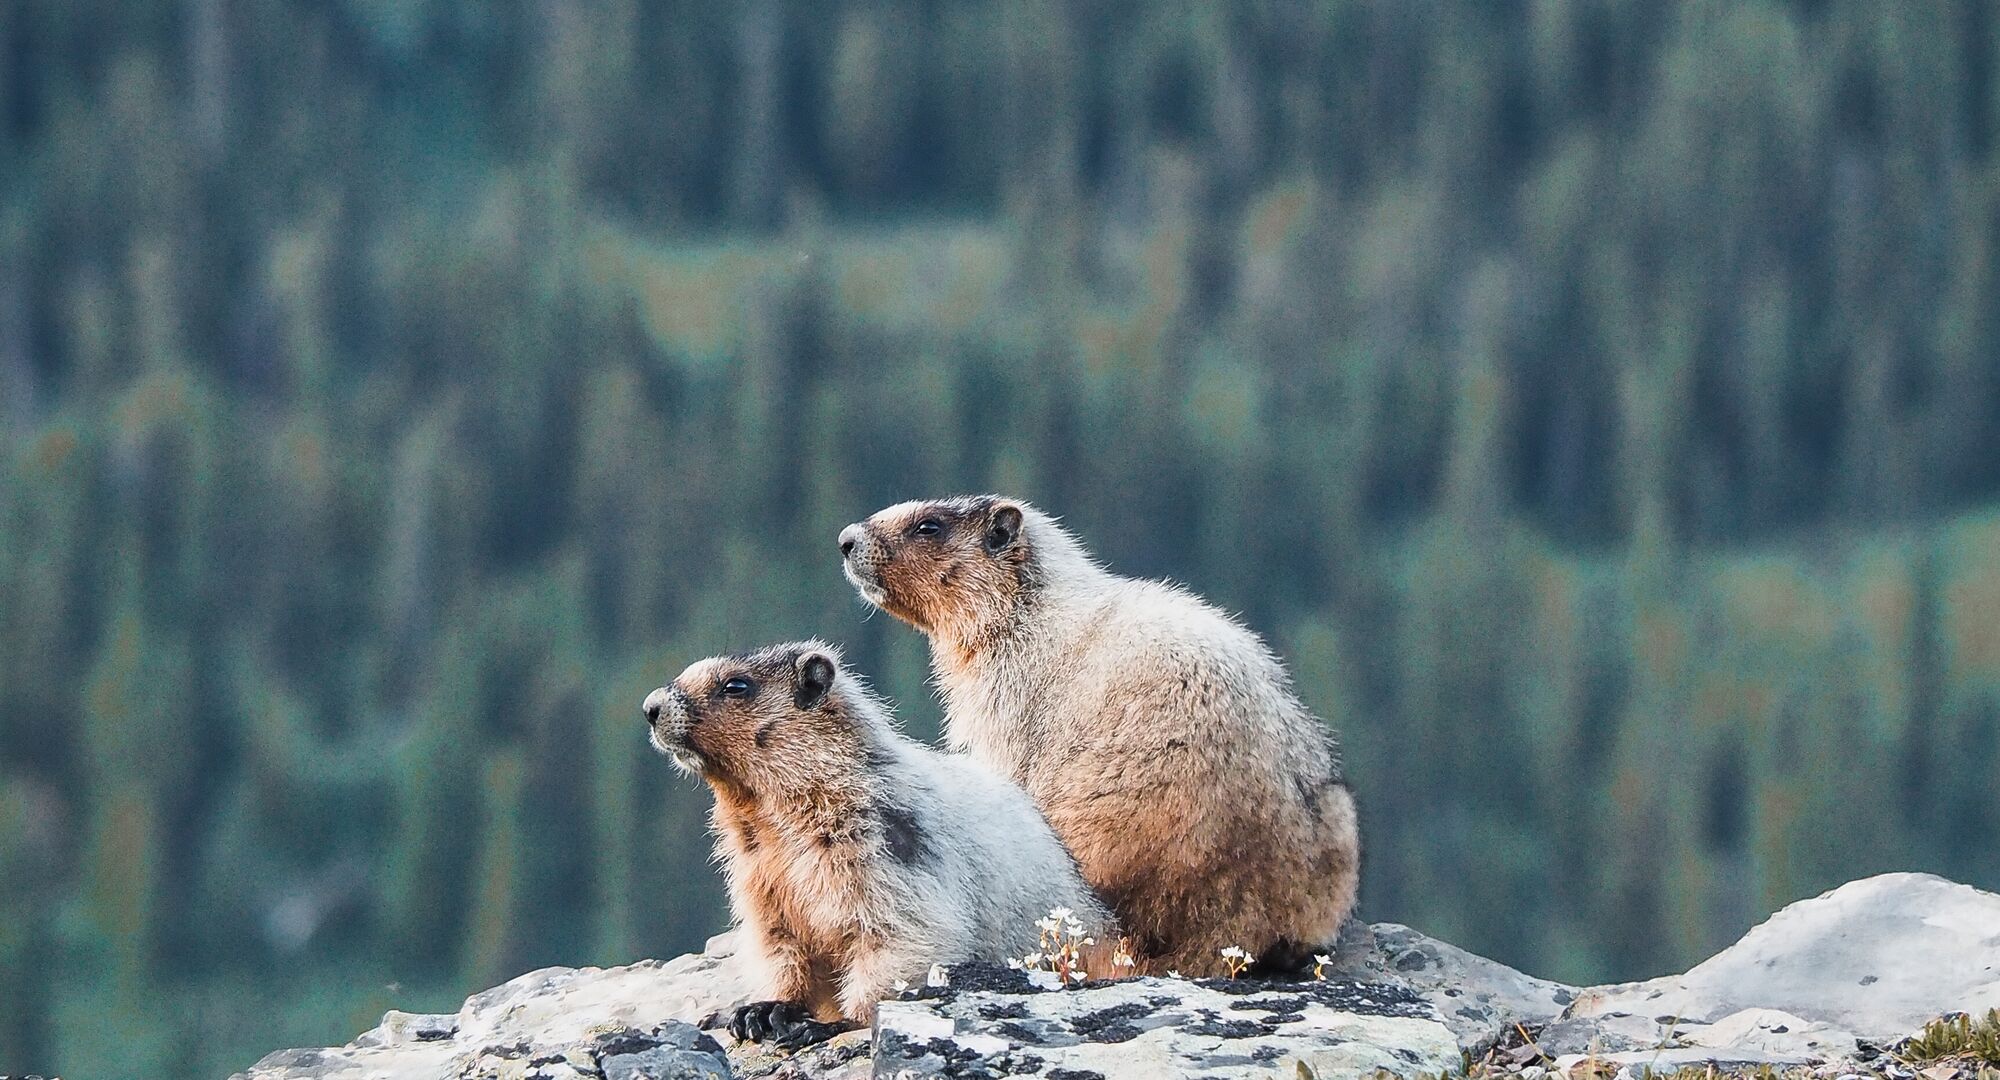 Two marmots on a ridge at sunset with trees in the background